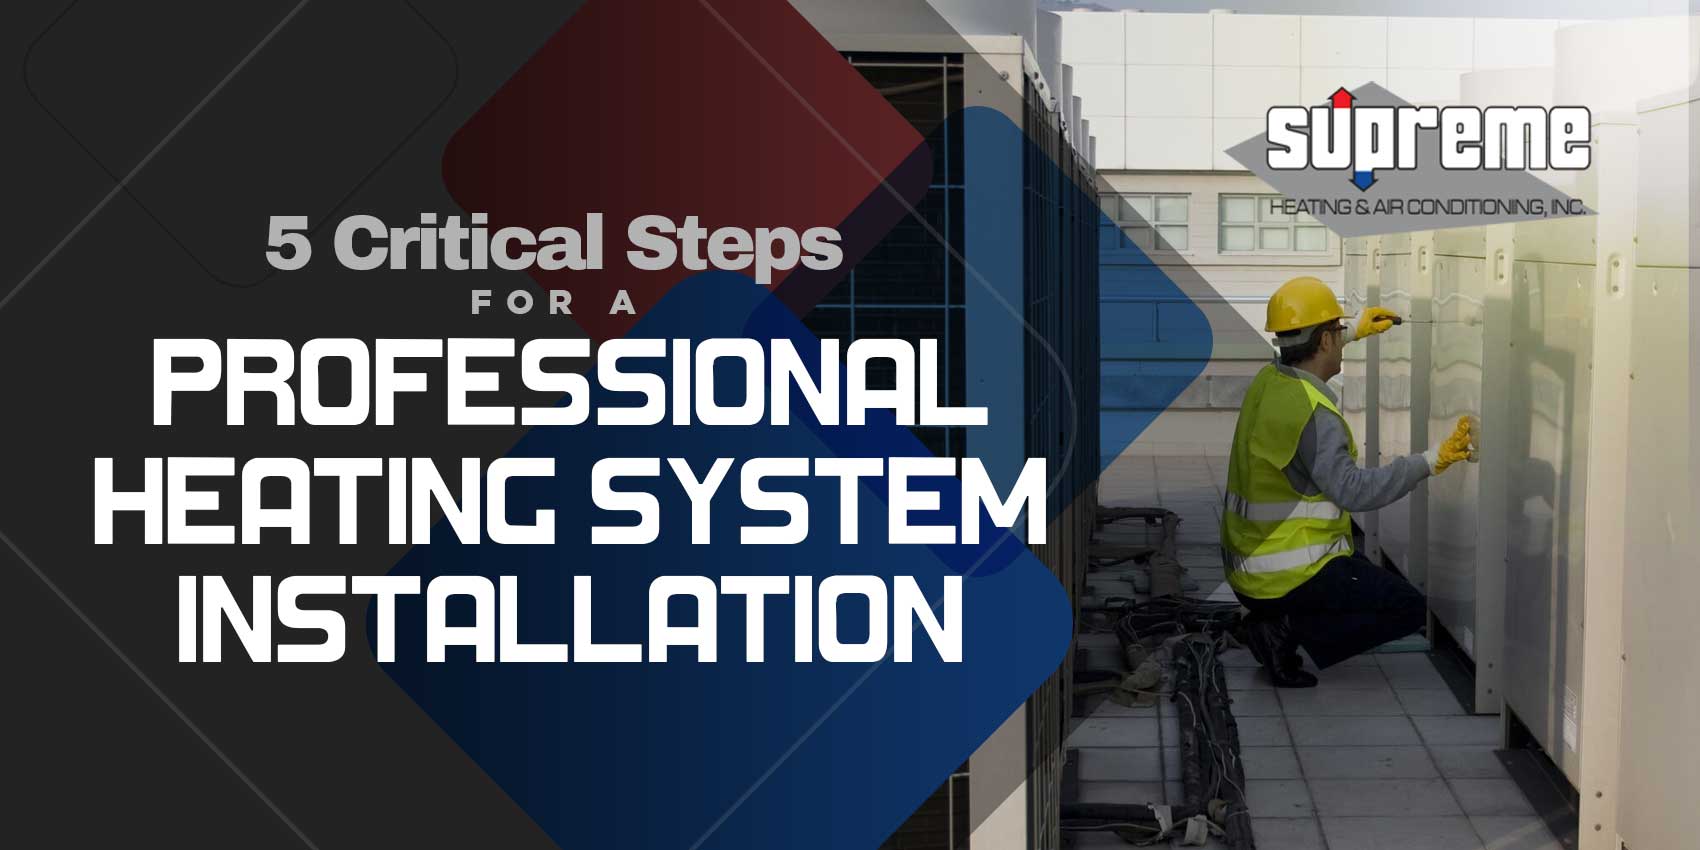 5 Critical Steps for a Professional Heating System Installation